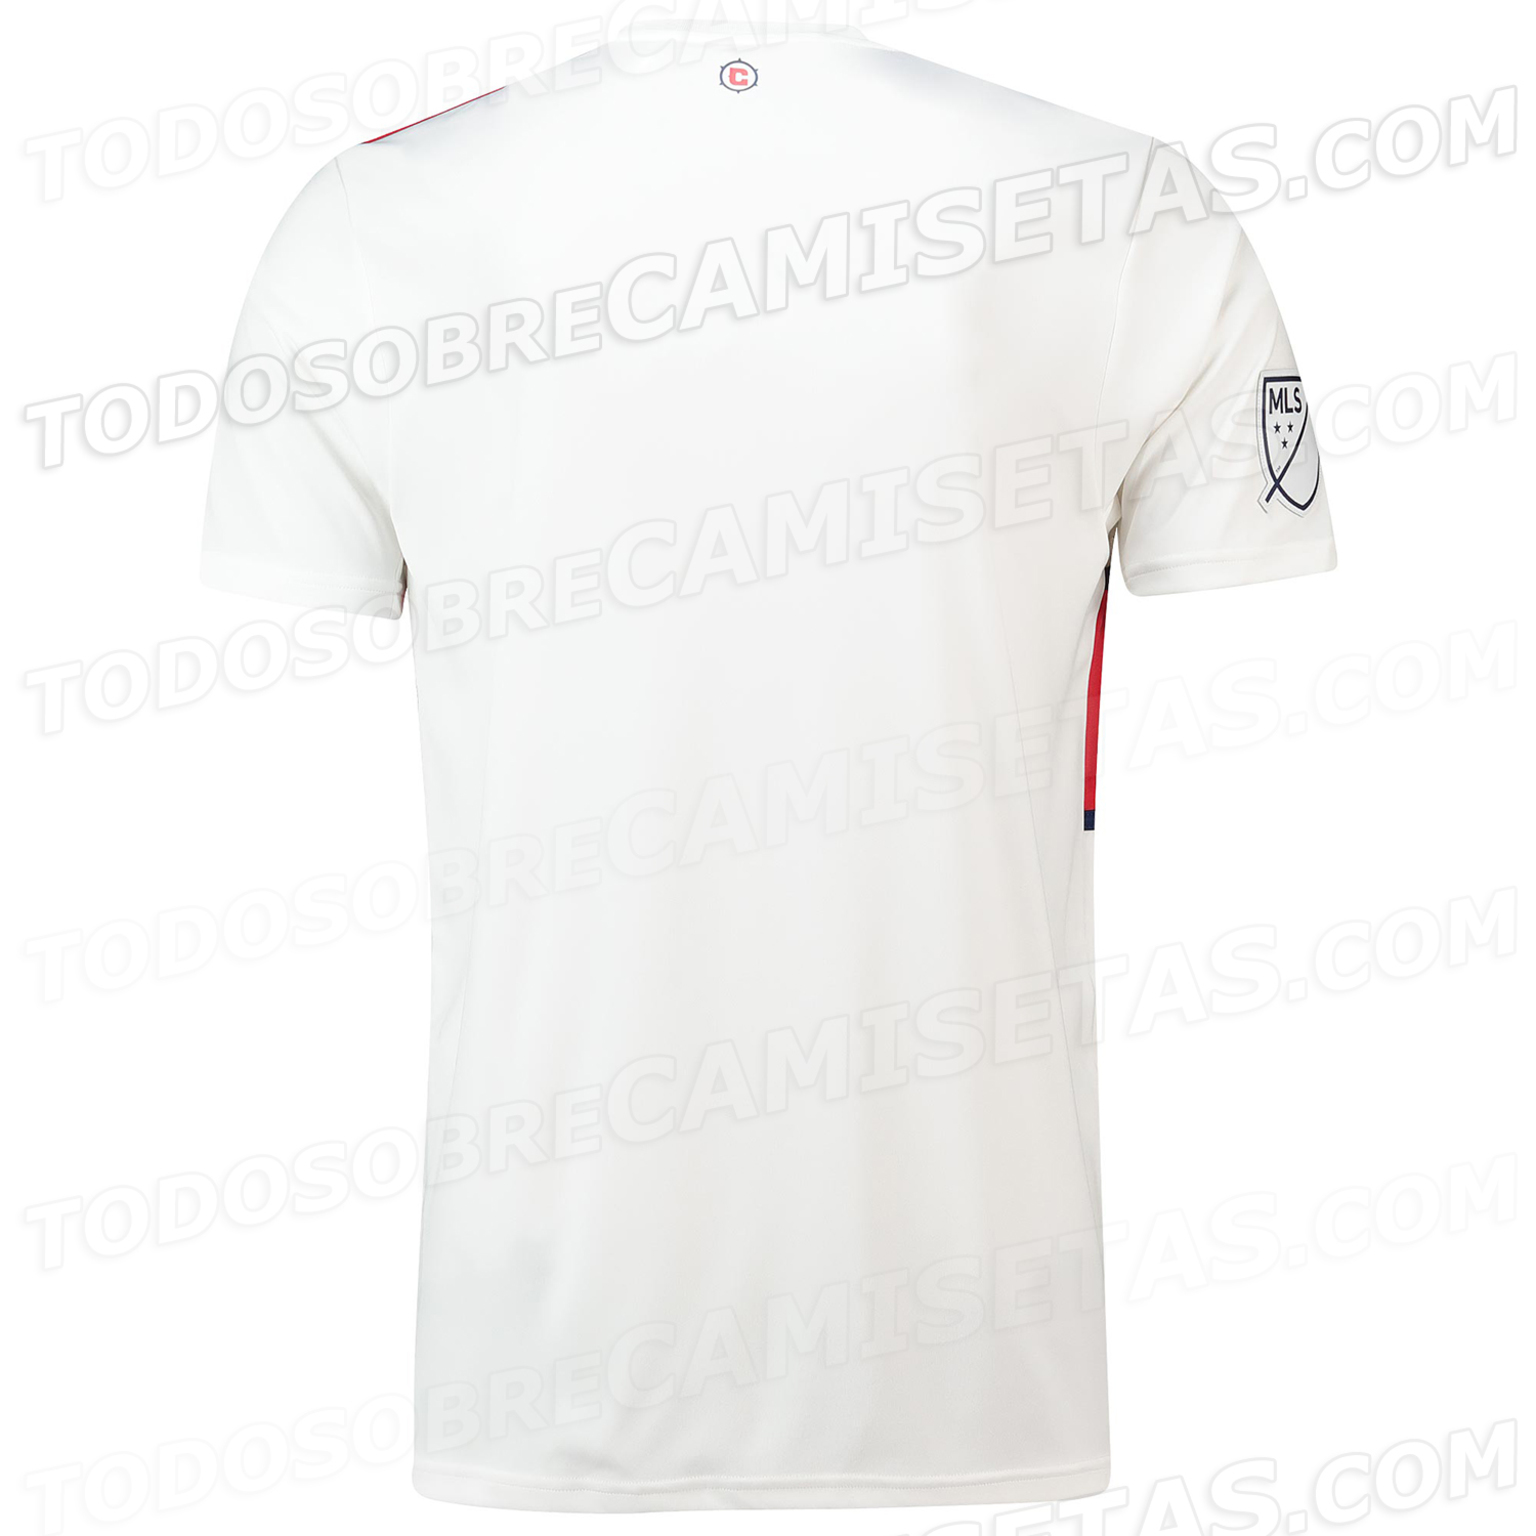 Chicago Fire 2019 adidas Away Kit LEAKED